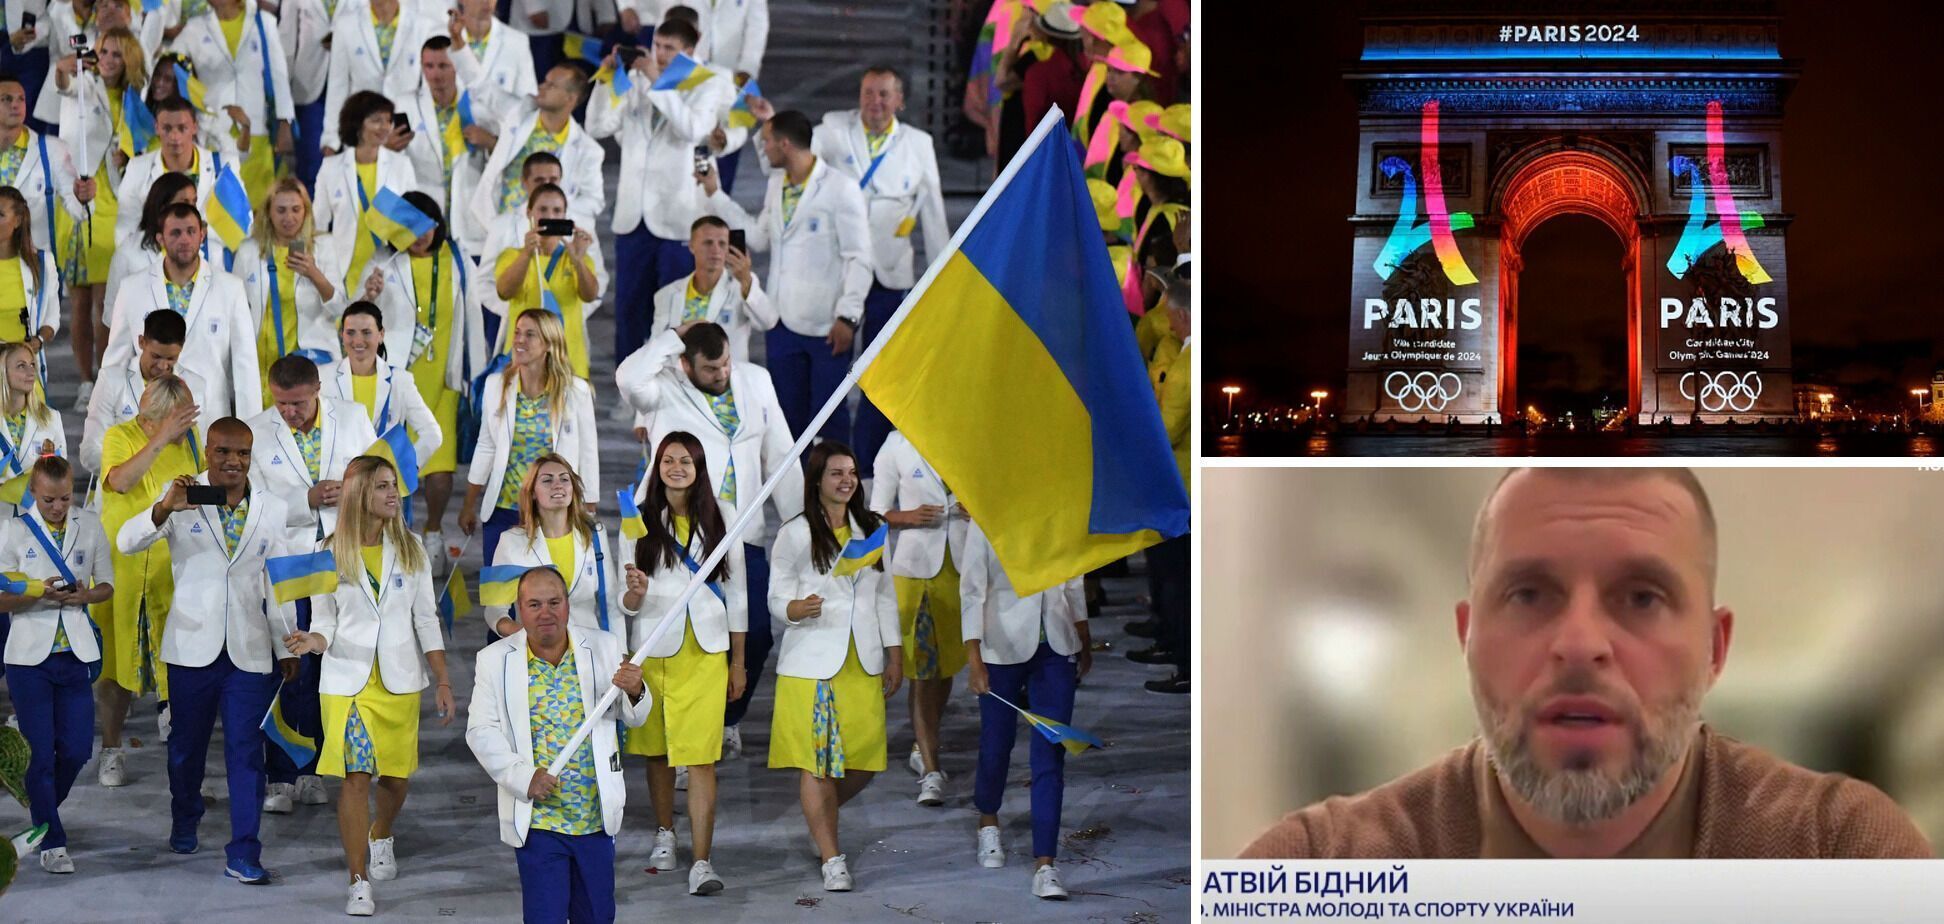 ''Not to fulfill Ukraine's demands''. IOC ''found a balanced solution'' to Russia and the 2024 Olympics